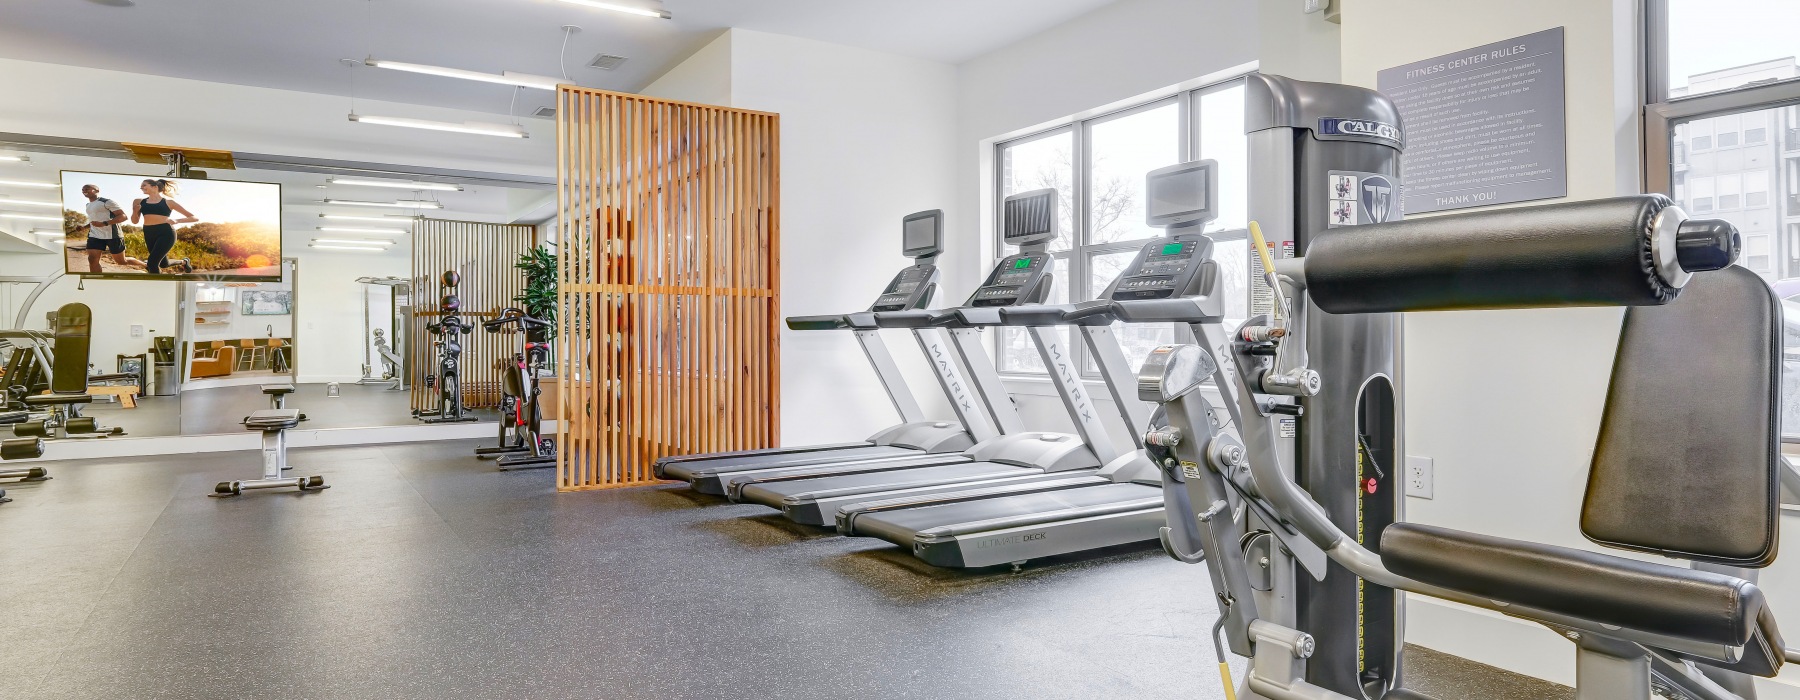 Fitness Room with white walls and various equipment